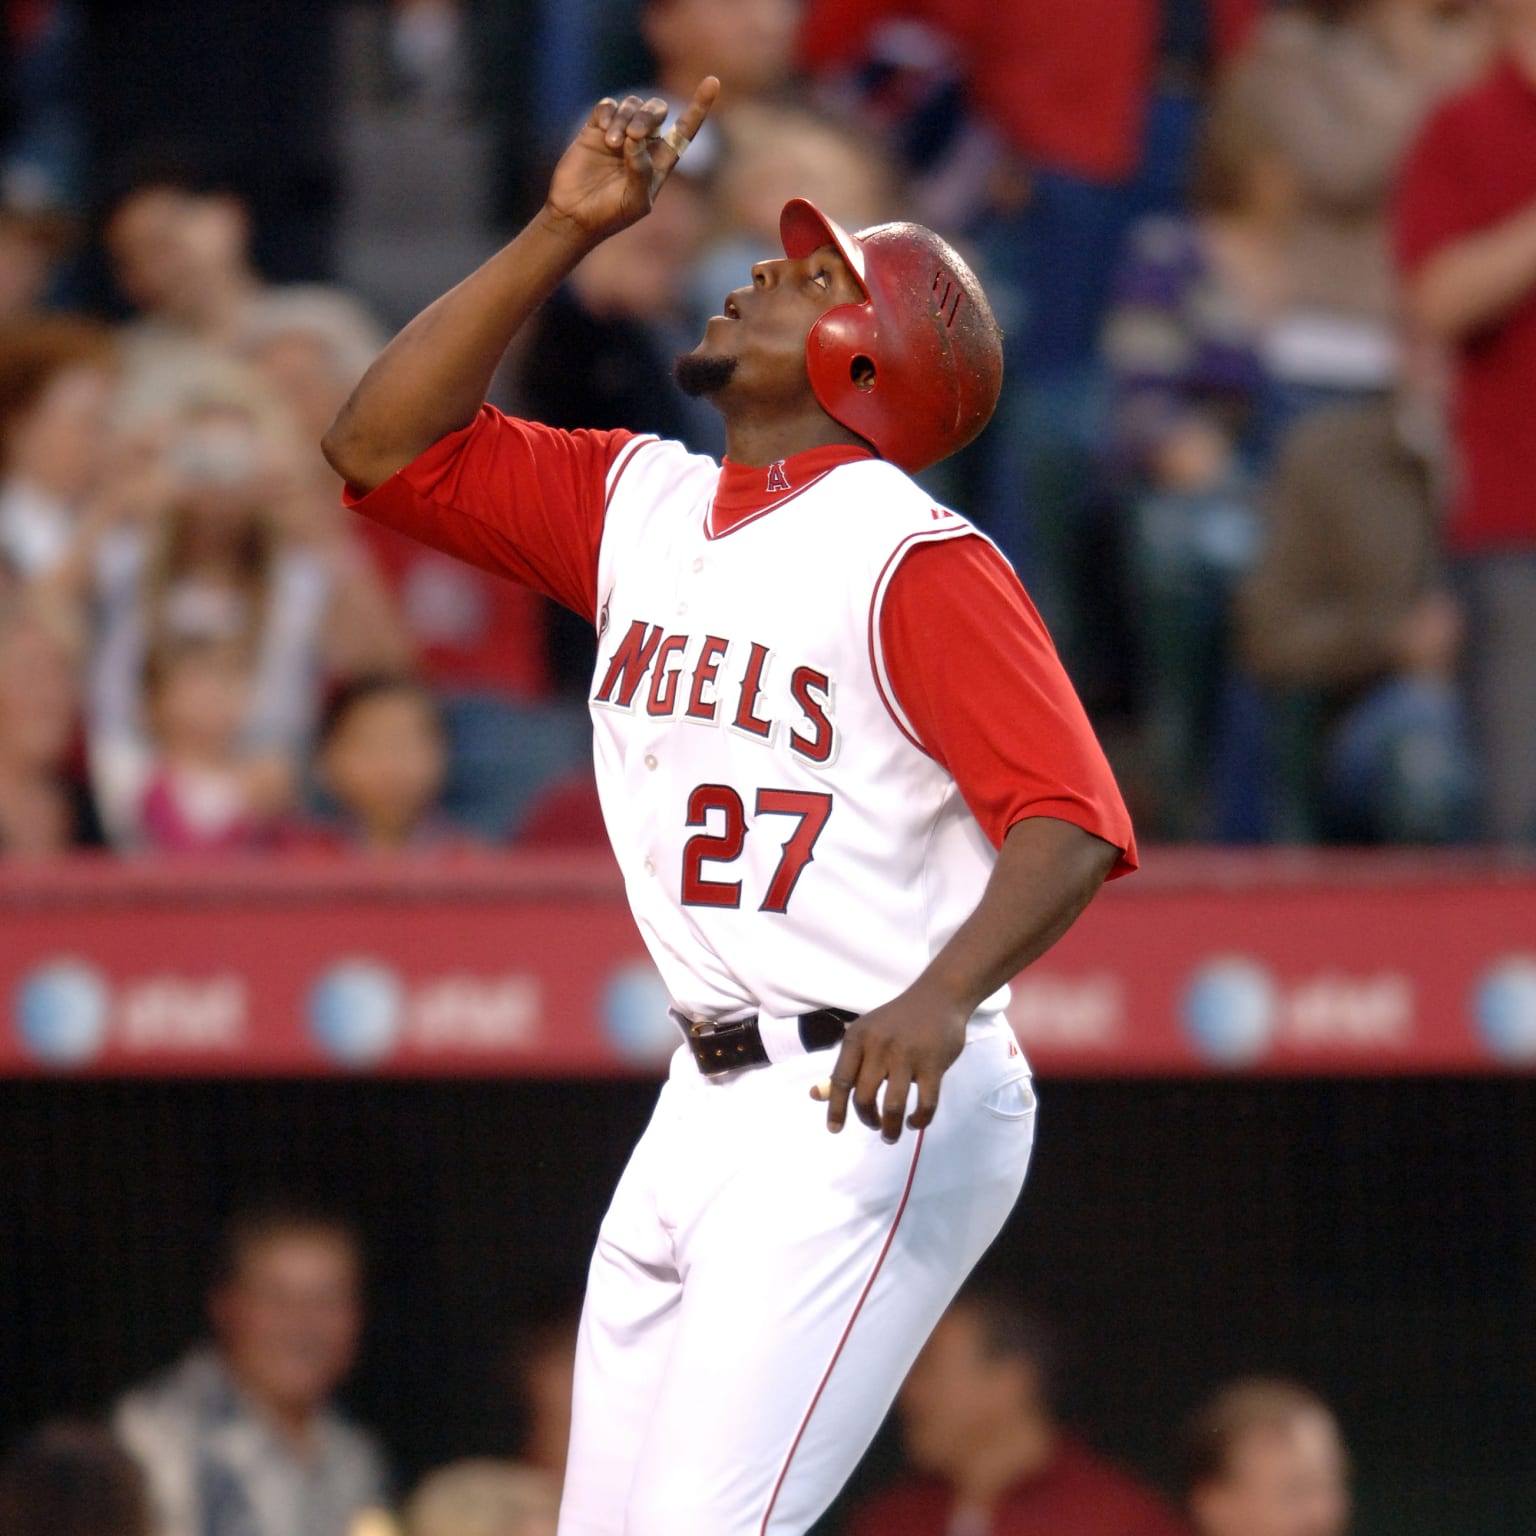 Ranking Vladimir Guerrero and the best Angels' hitters of all-time